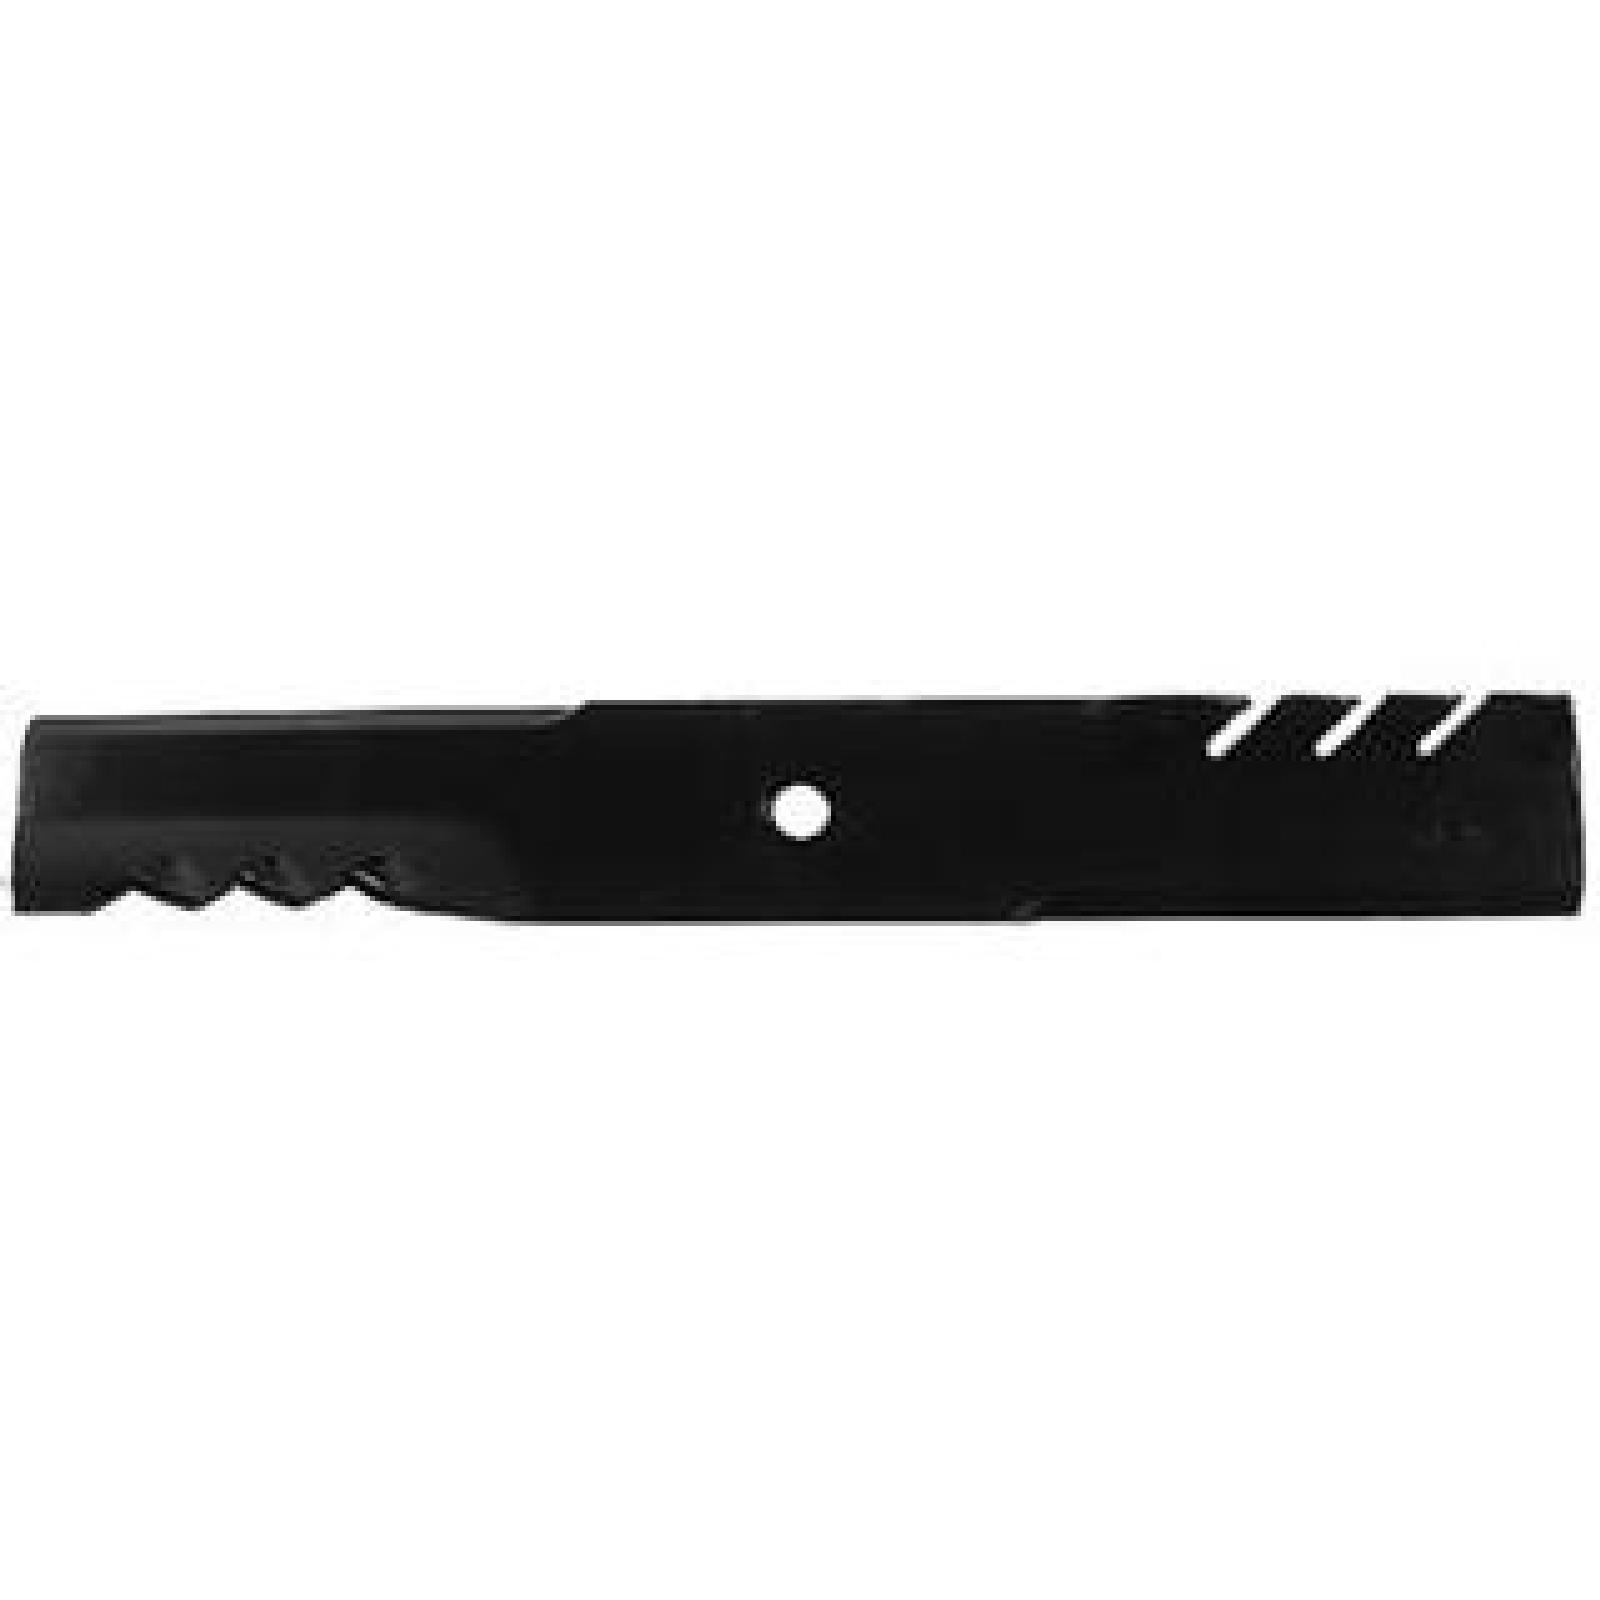 BLADE, GRAVELY, GATOR G6 part# 396-806 by Oregon